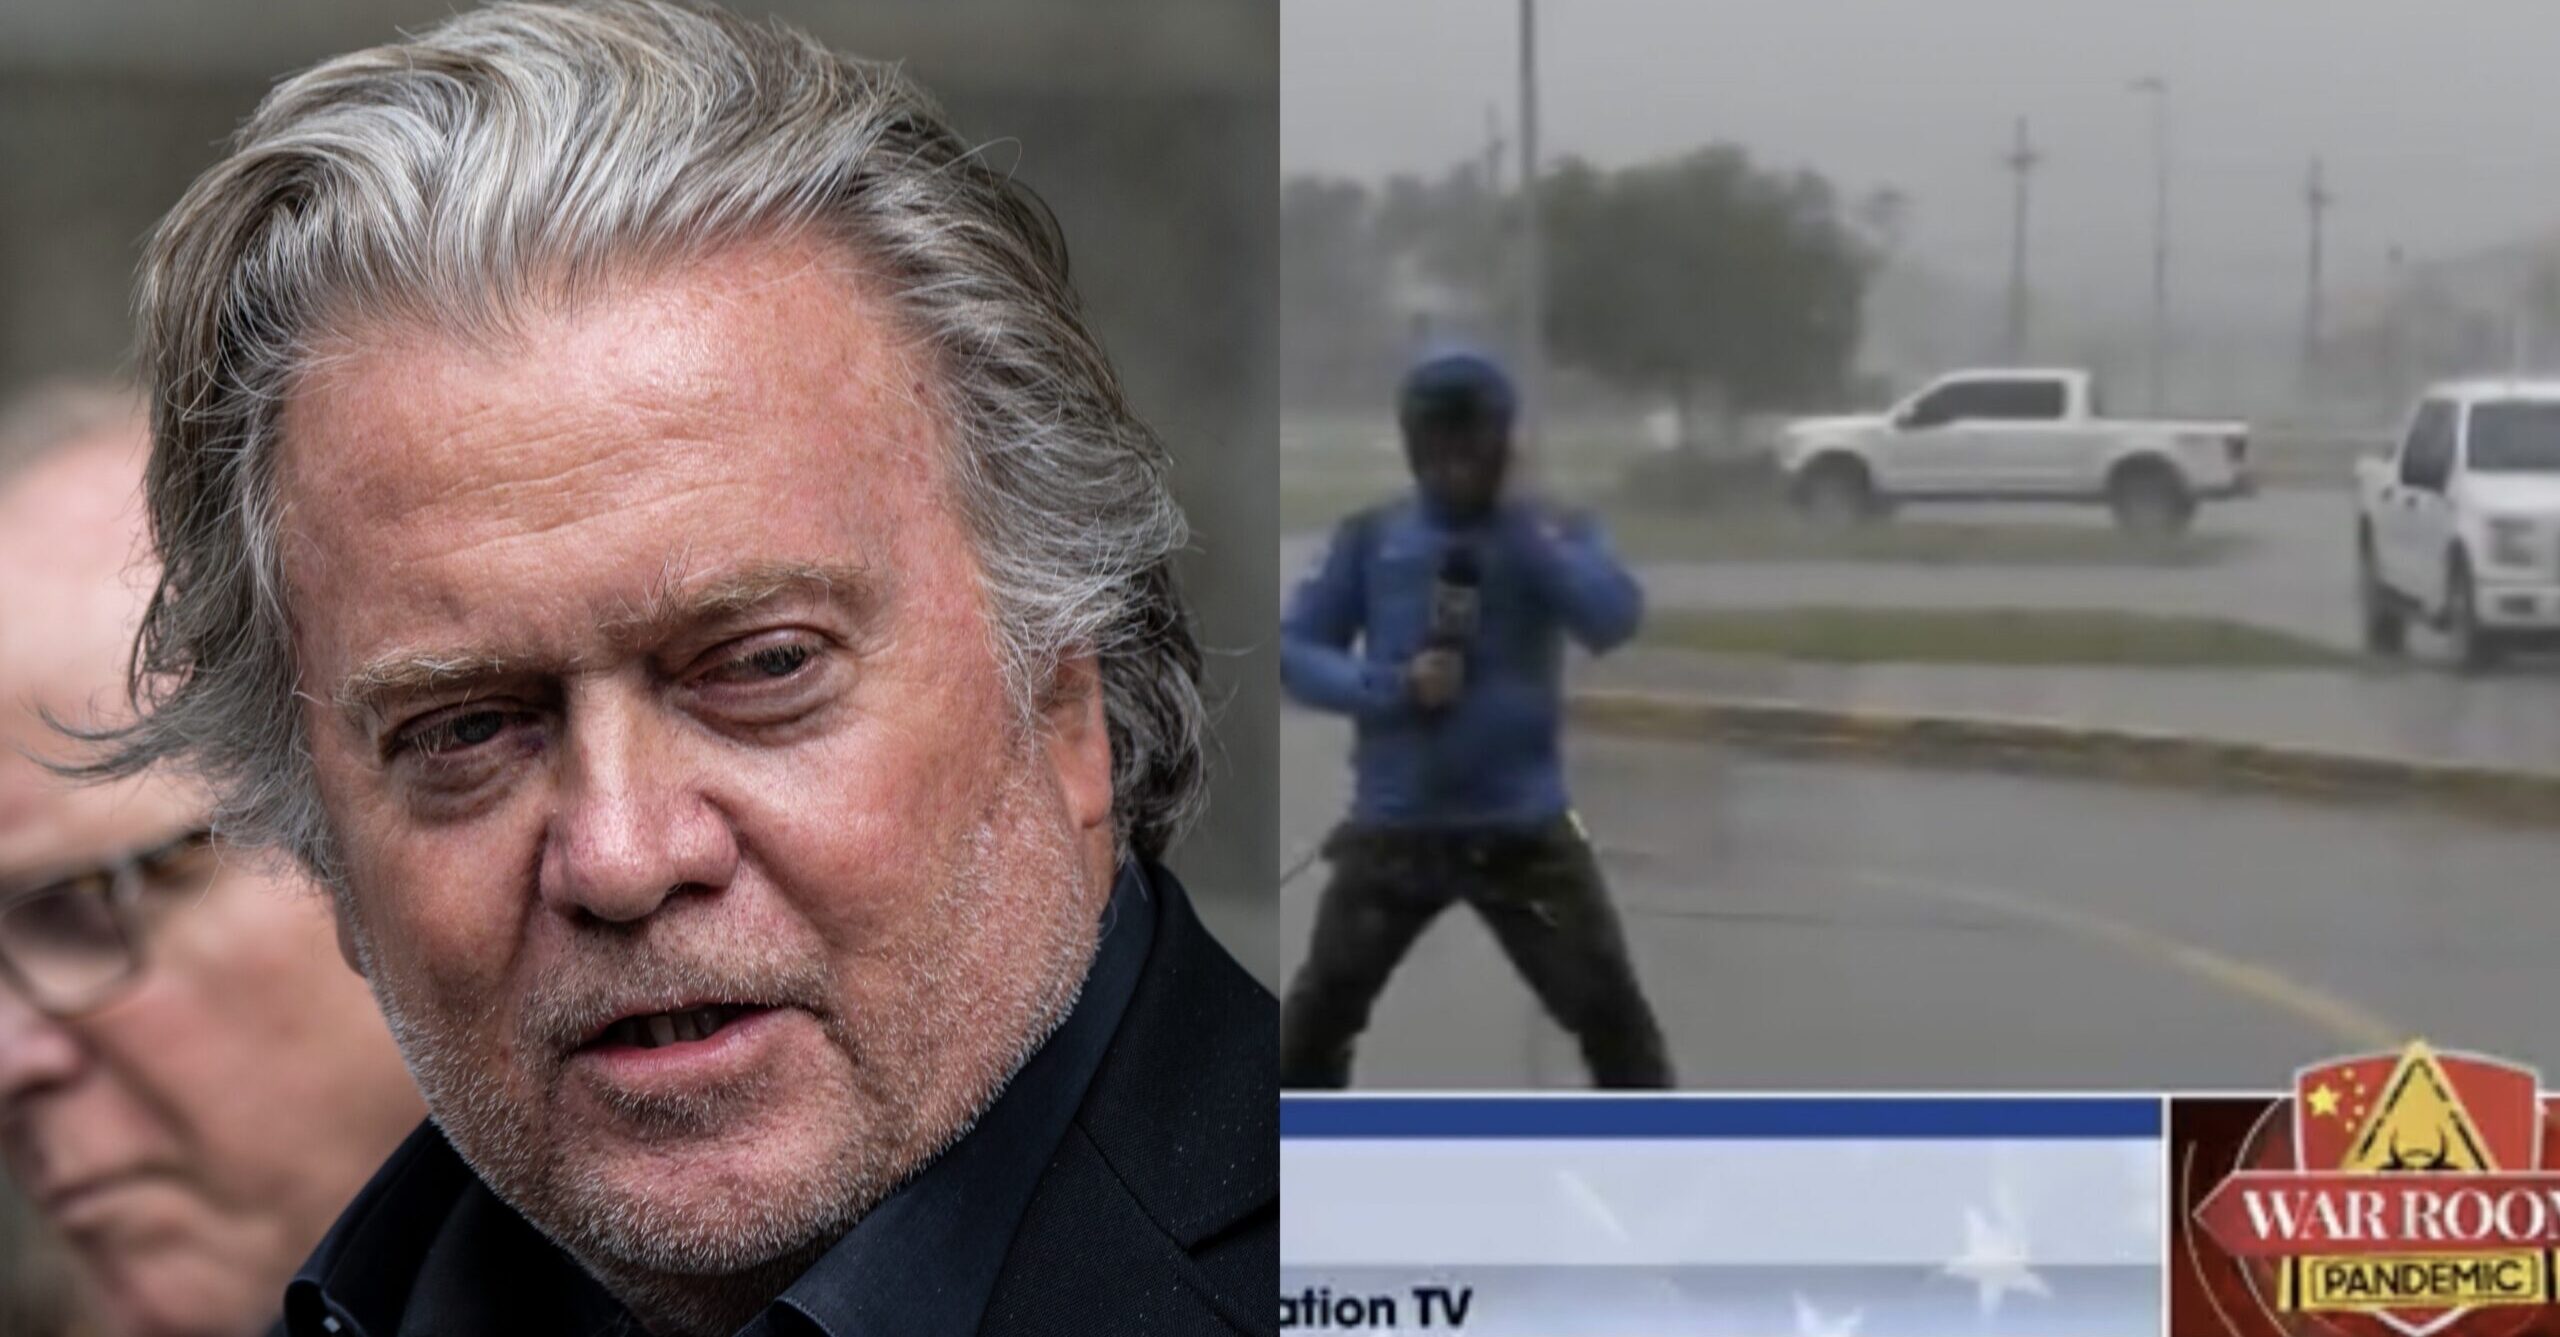 Is Procter & Gamble Unwittingly Funding Steve Bannon’s Podcast Through a Weather Station? (mediaite.com)